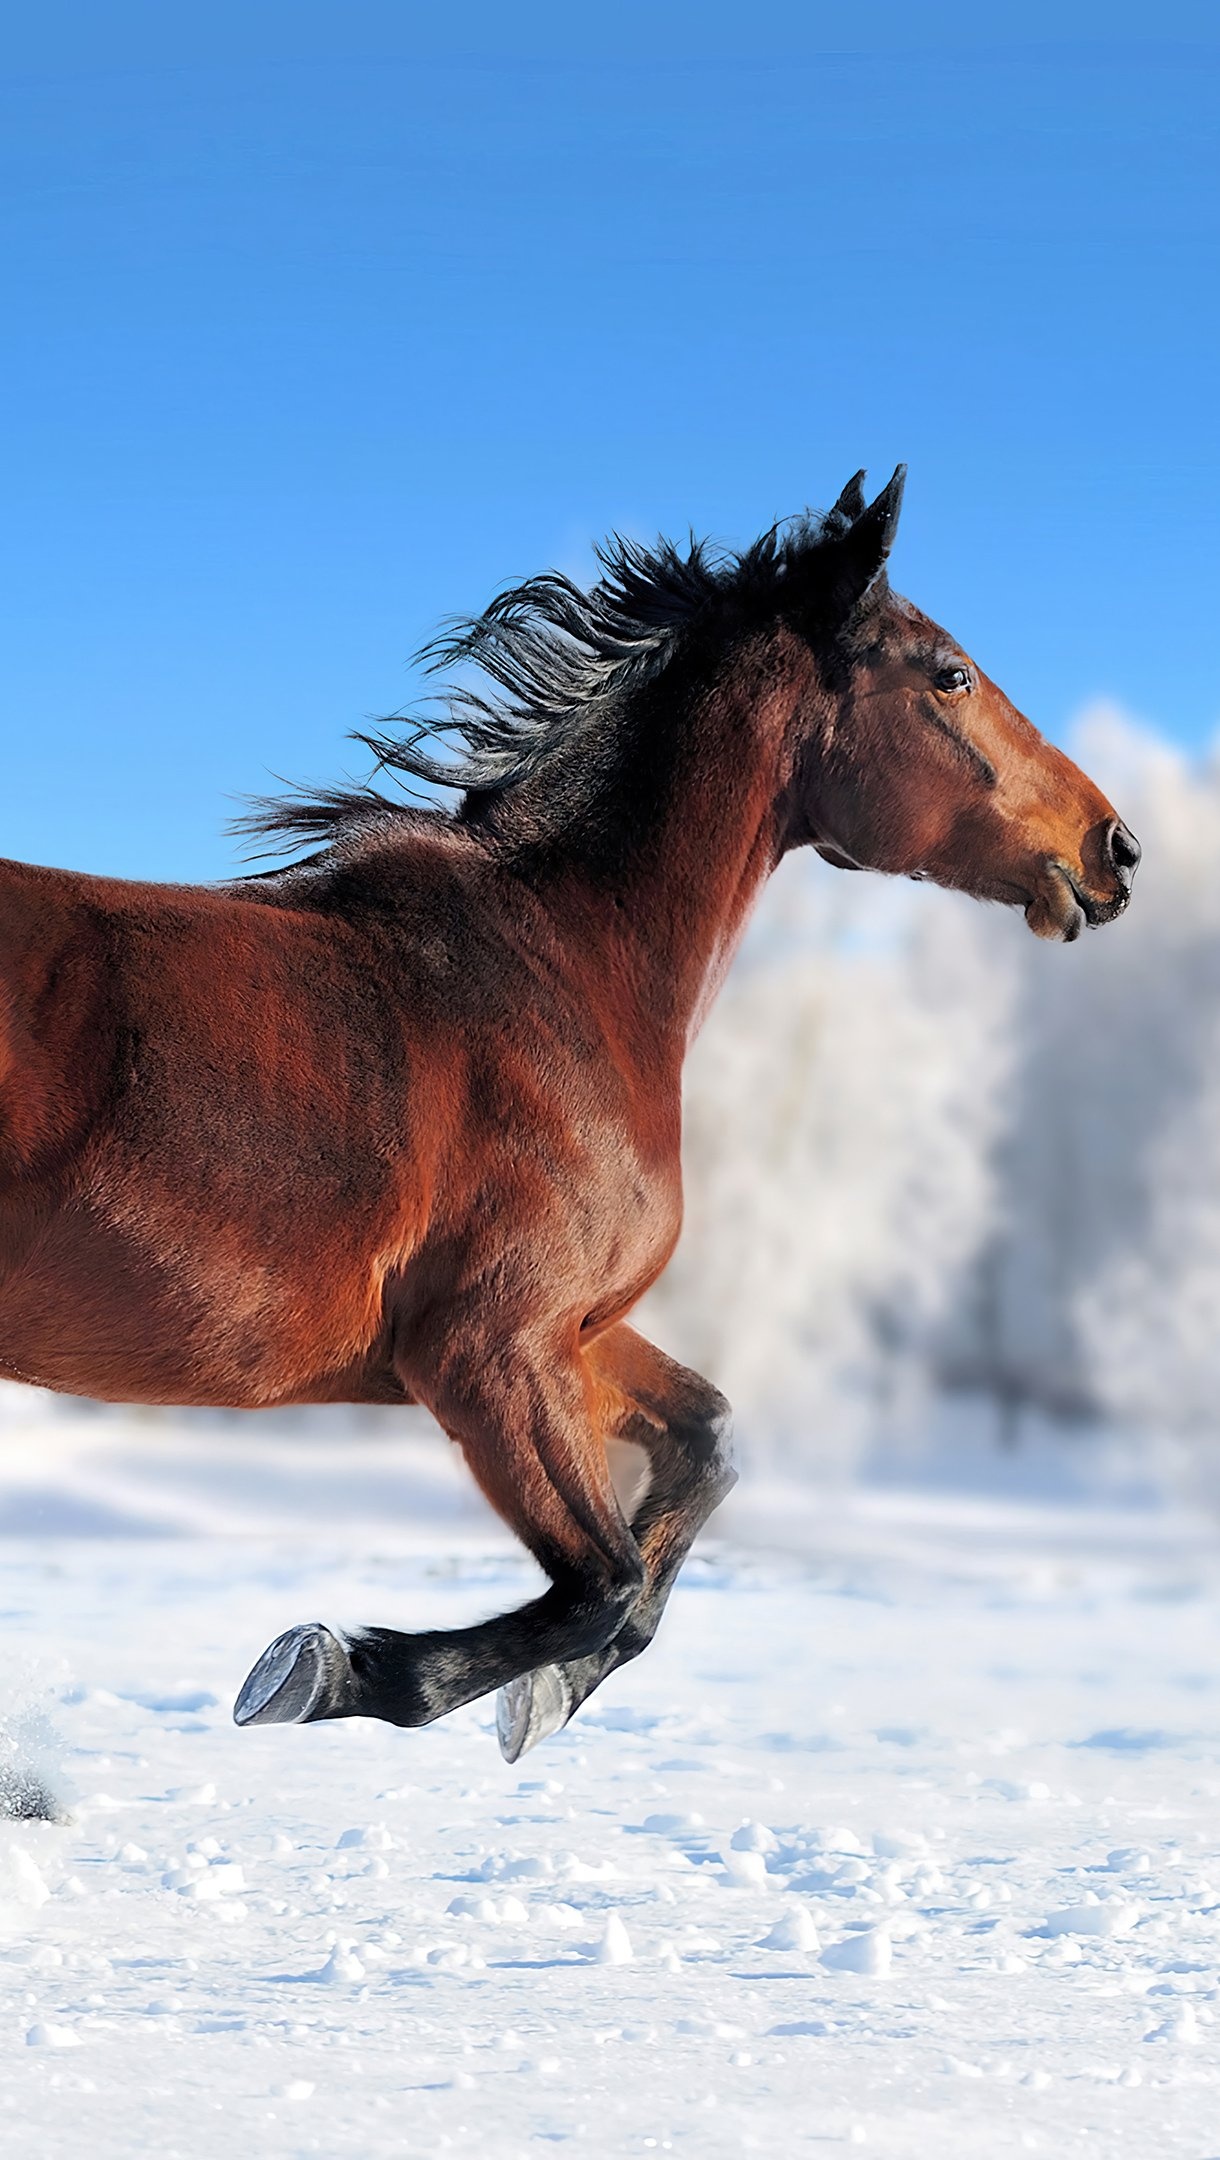 Horses in the Snow, Running horse in snow, 4K Ultra HD wallpaper, 1220x2160 HD Phone